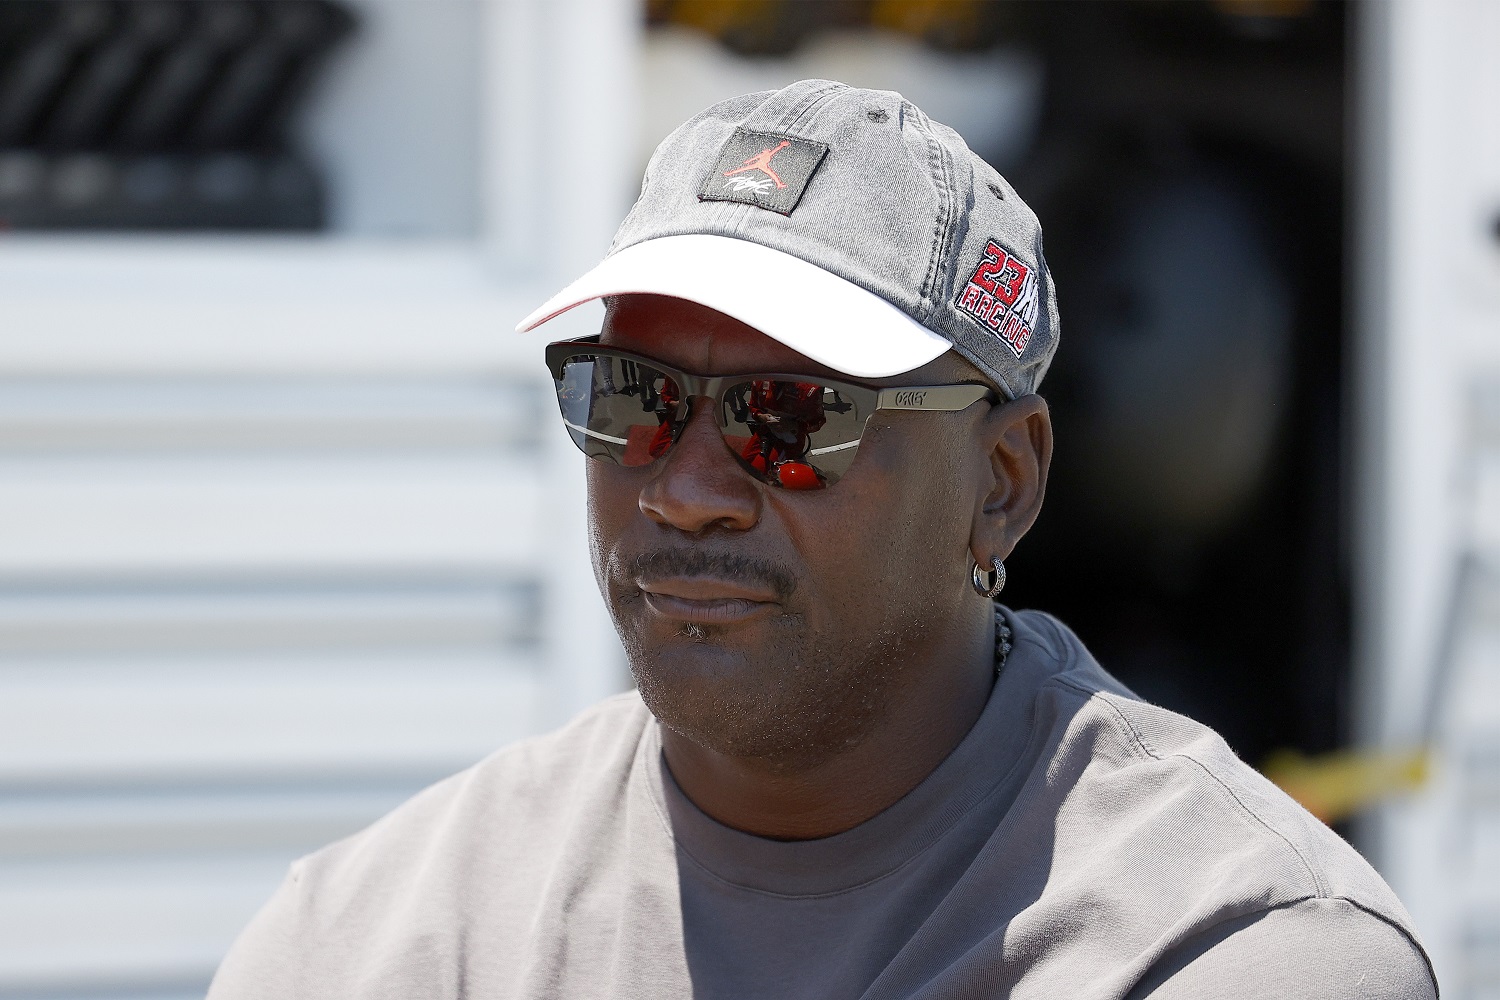 NBA Hall of Famer and c23XI Racing co-owner Michael Jordan waits in the pit area before the NASCAR Cup Series race at Sonoma Raceway on June 6, 2021.